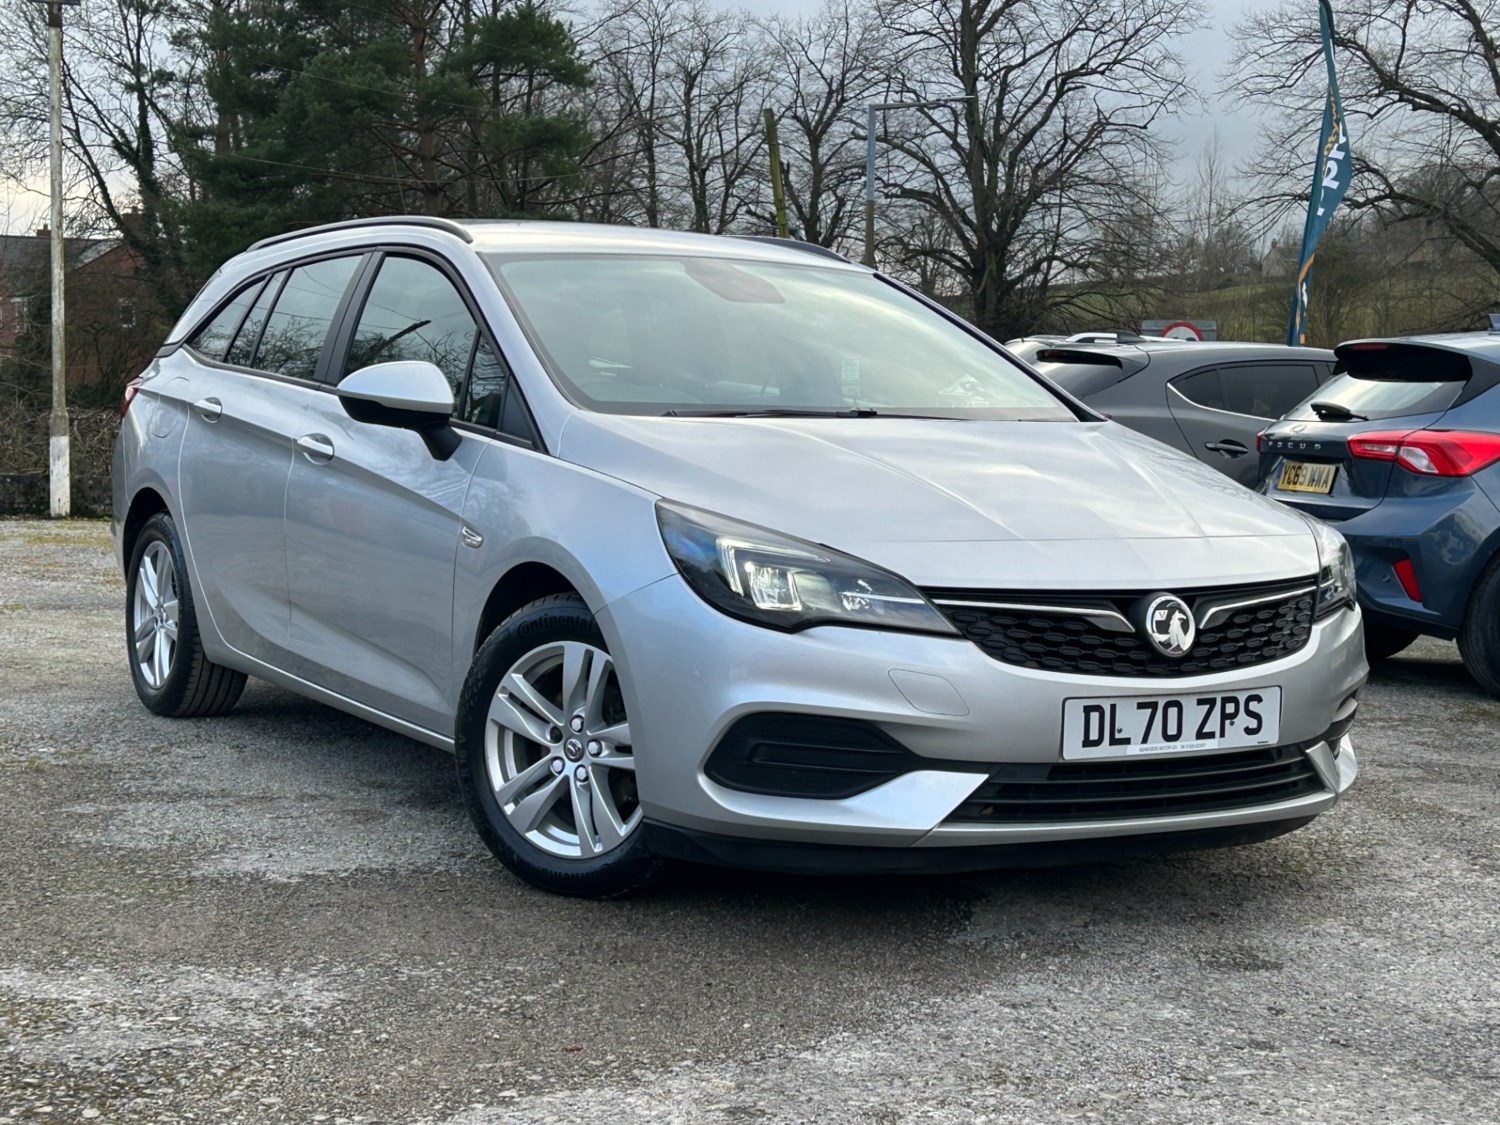 2021 used Vauxhall Astra 1.5 Turbo D Business Edition Nav 5dr